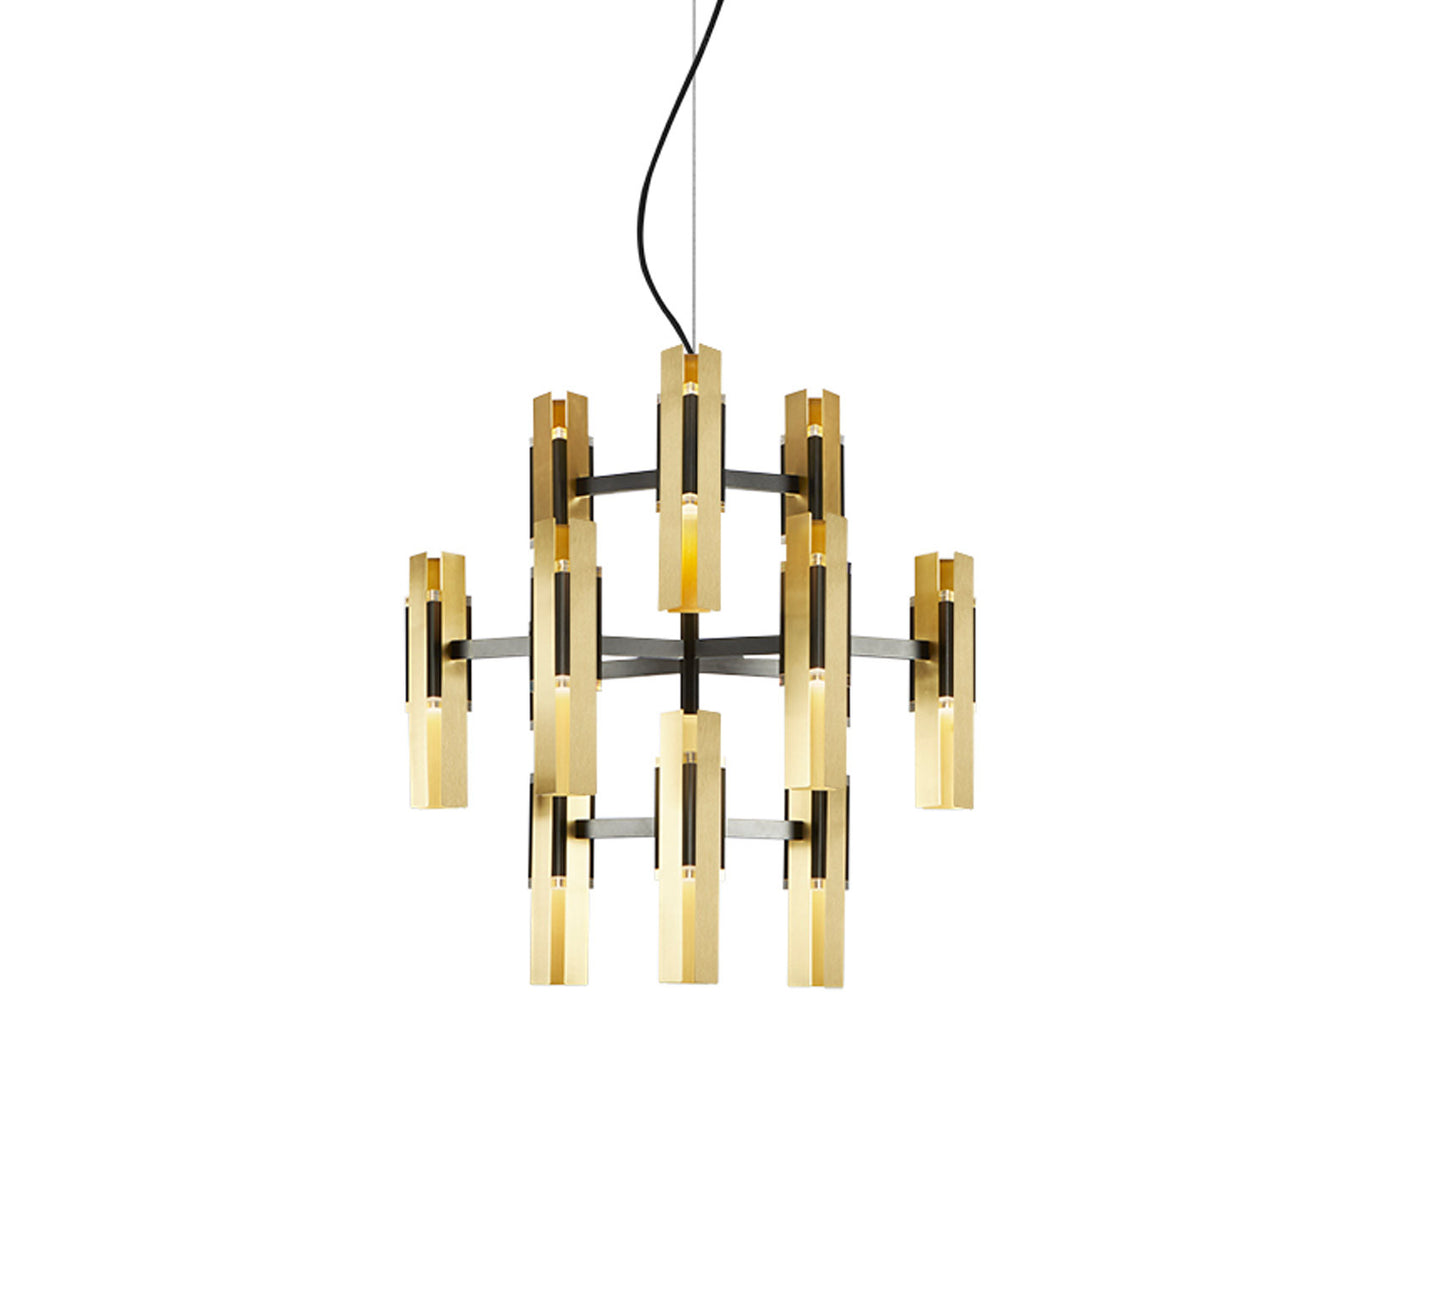 EXCALIBUR CHANDELIER 559.12 BY TOOY $14,298.00